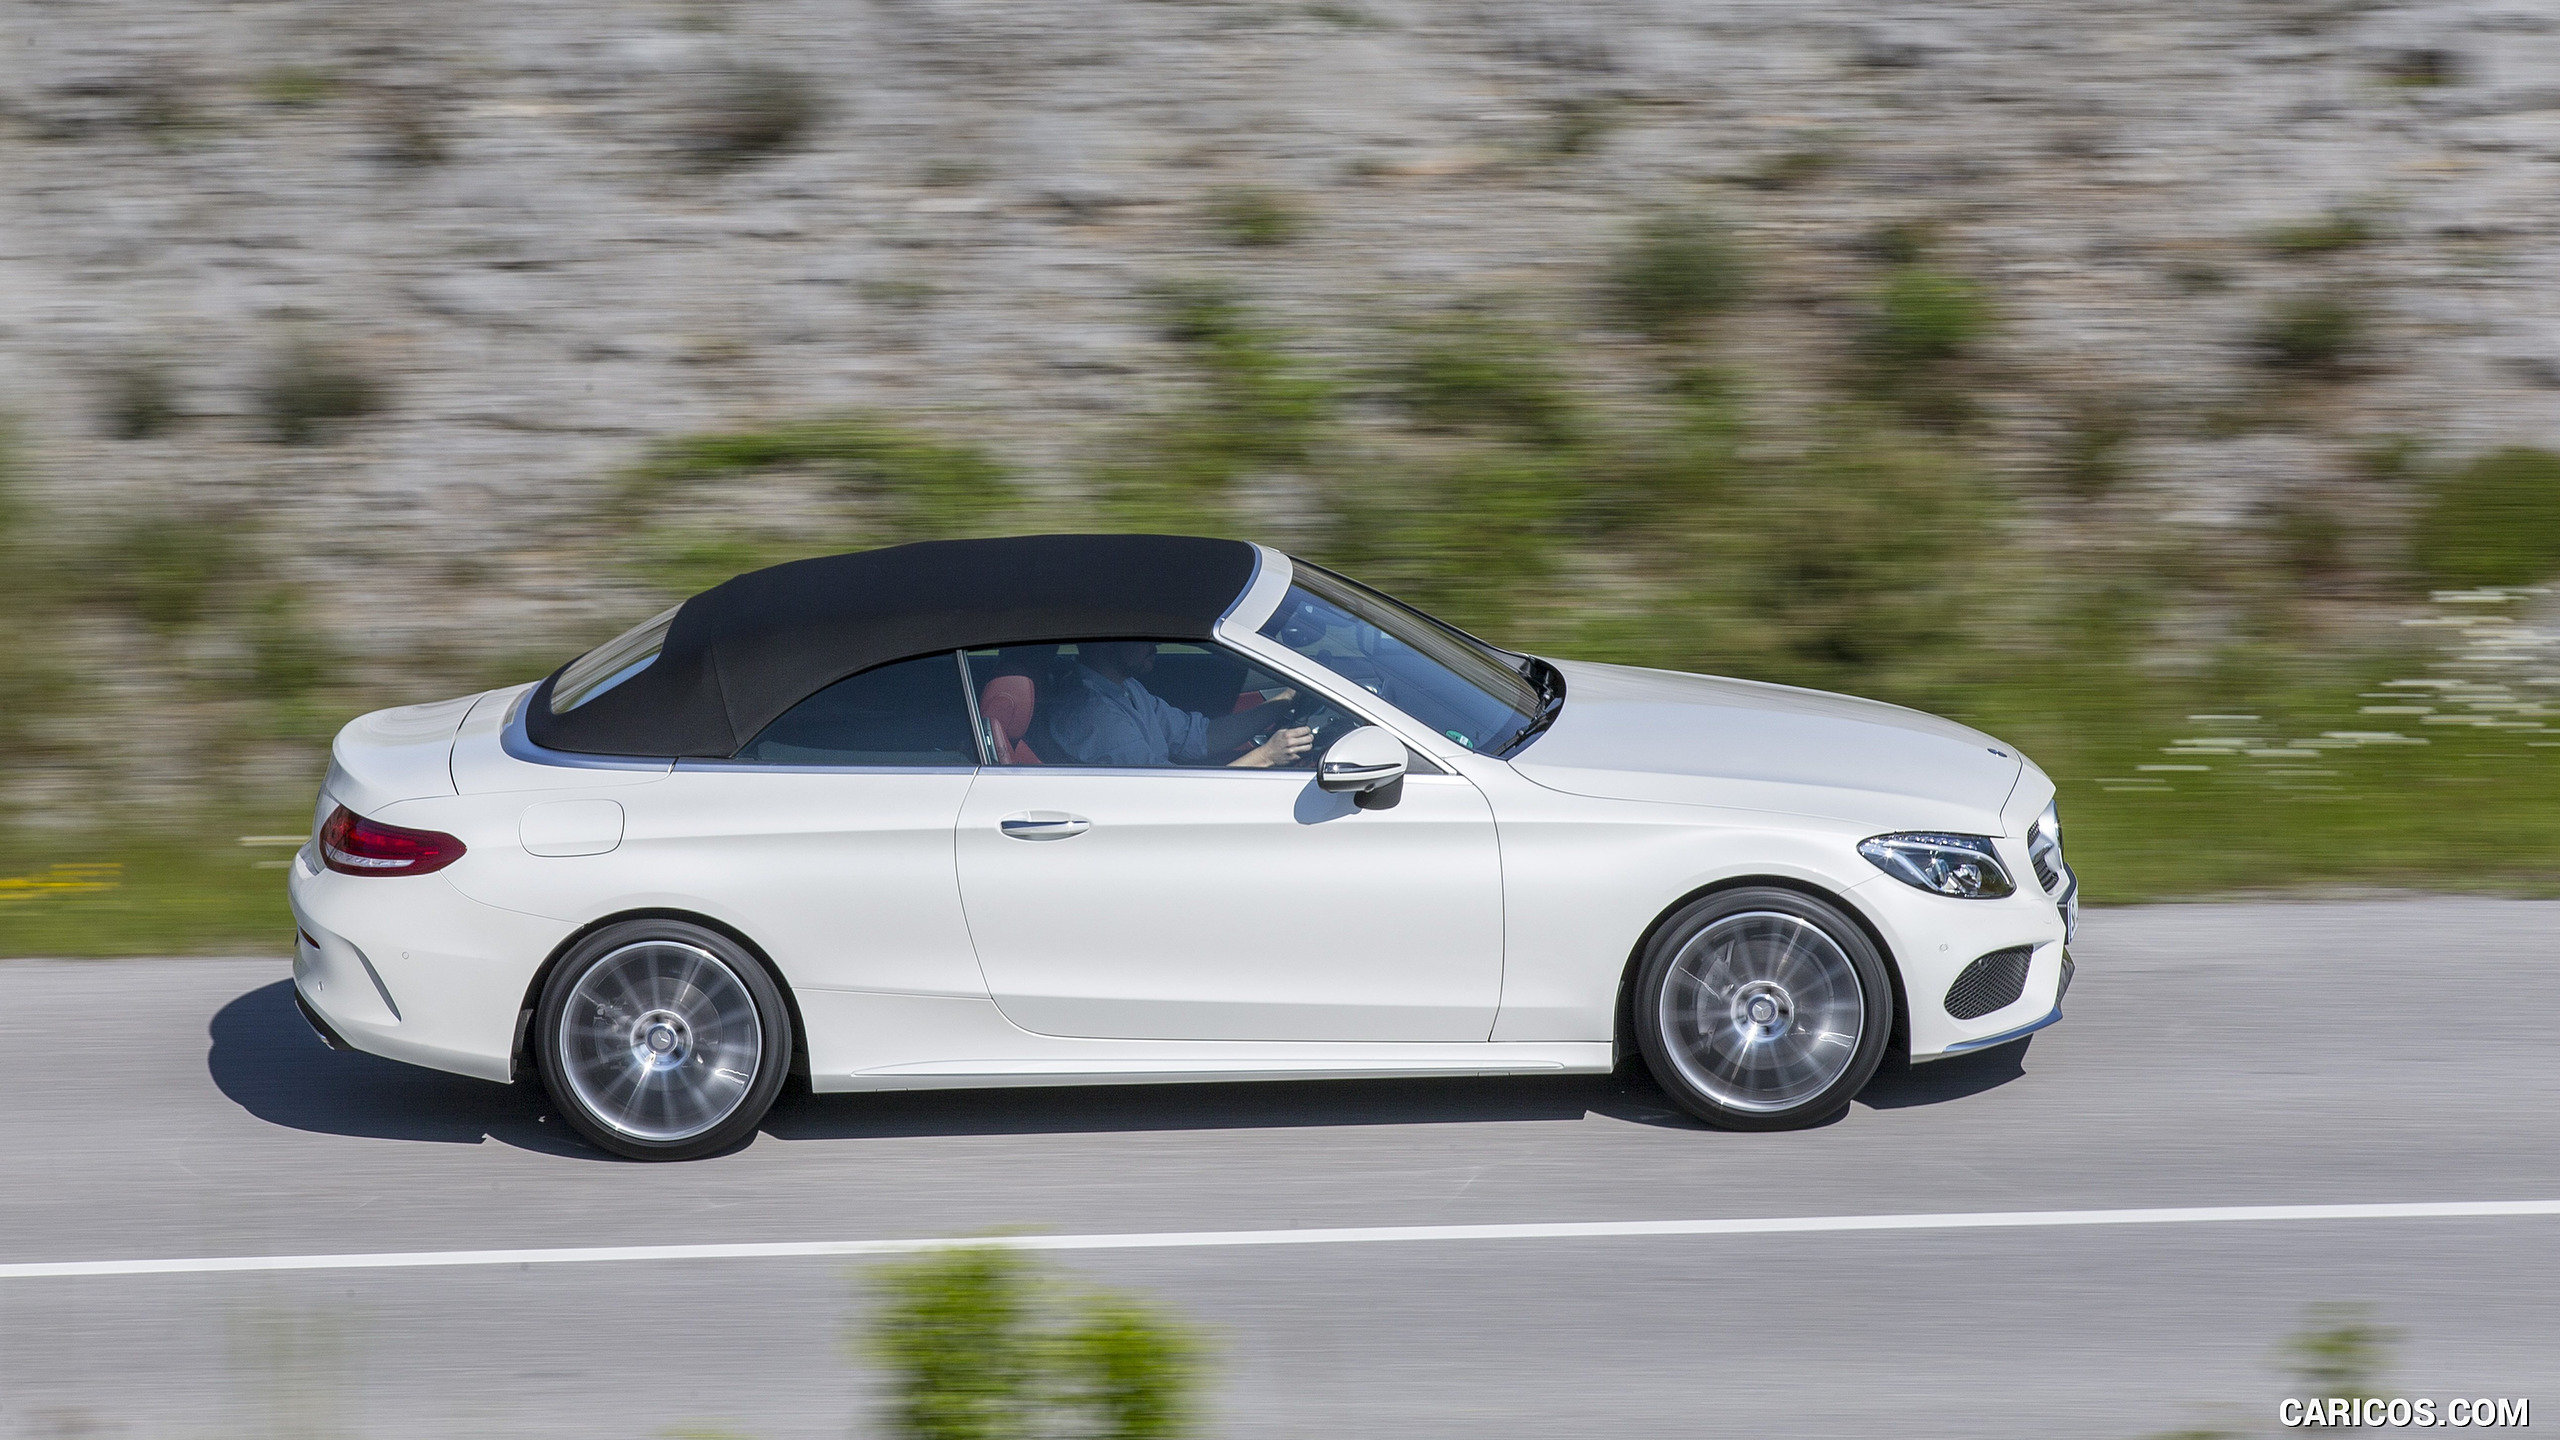 2017 Mercedes-Benz C-Class C300 Cabriolet - Side, #47 of 96